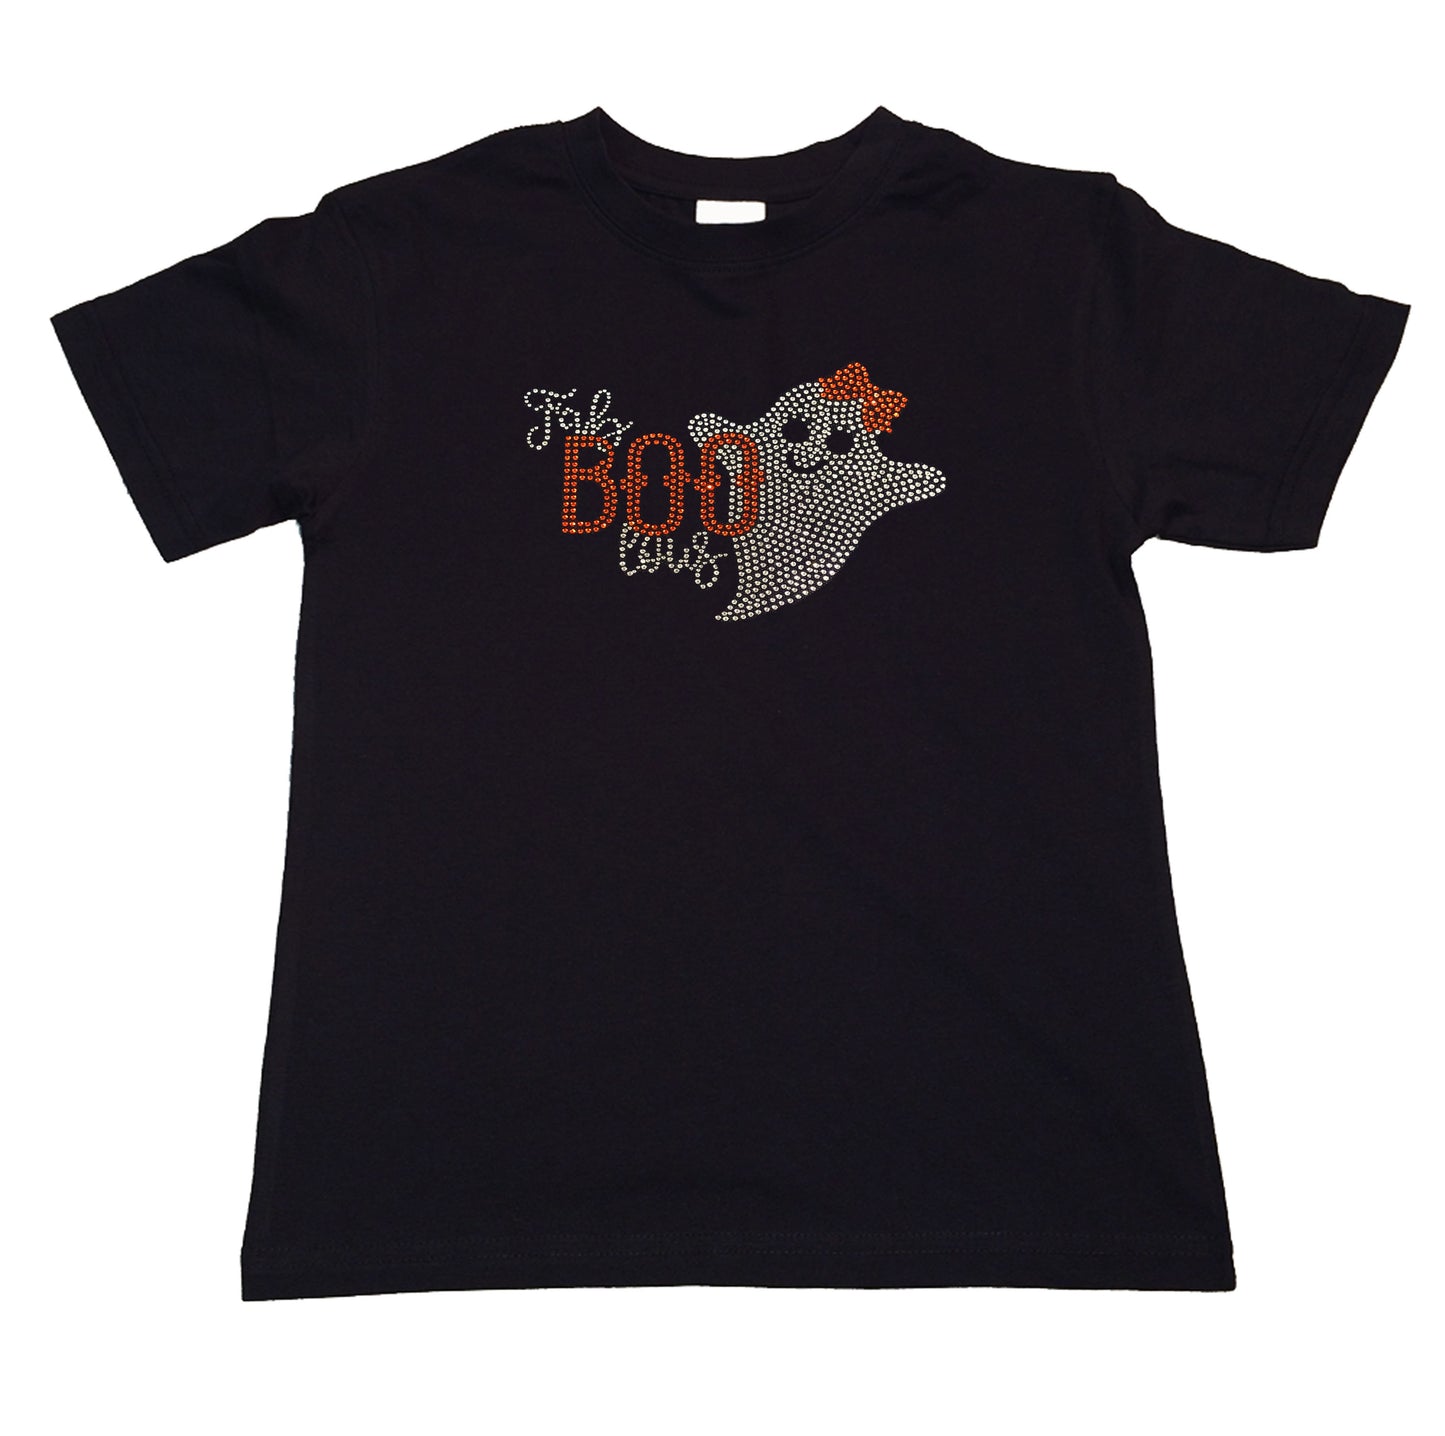 Girls Rhinestone T-Shirt " Halloween Ghost Fab Boo lous in Rhinestones " Kids Size 3 to 14 Available